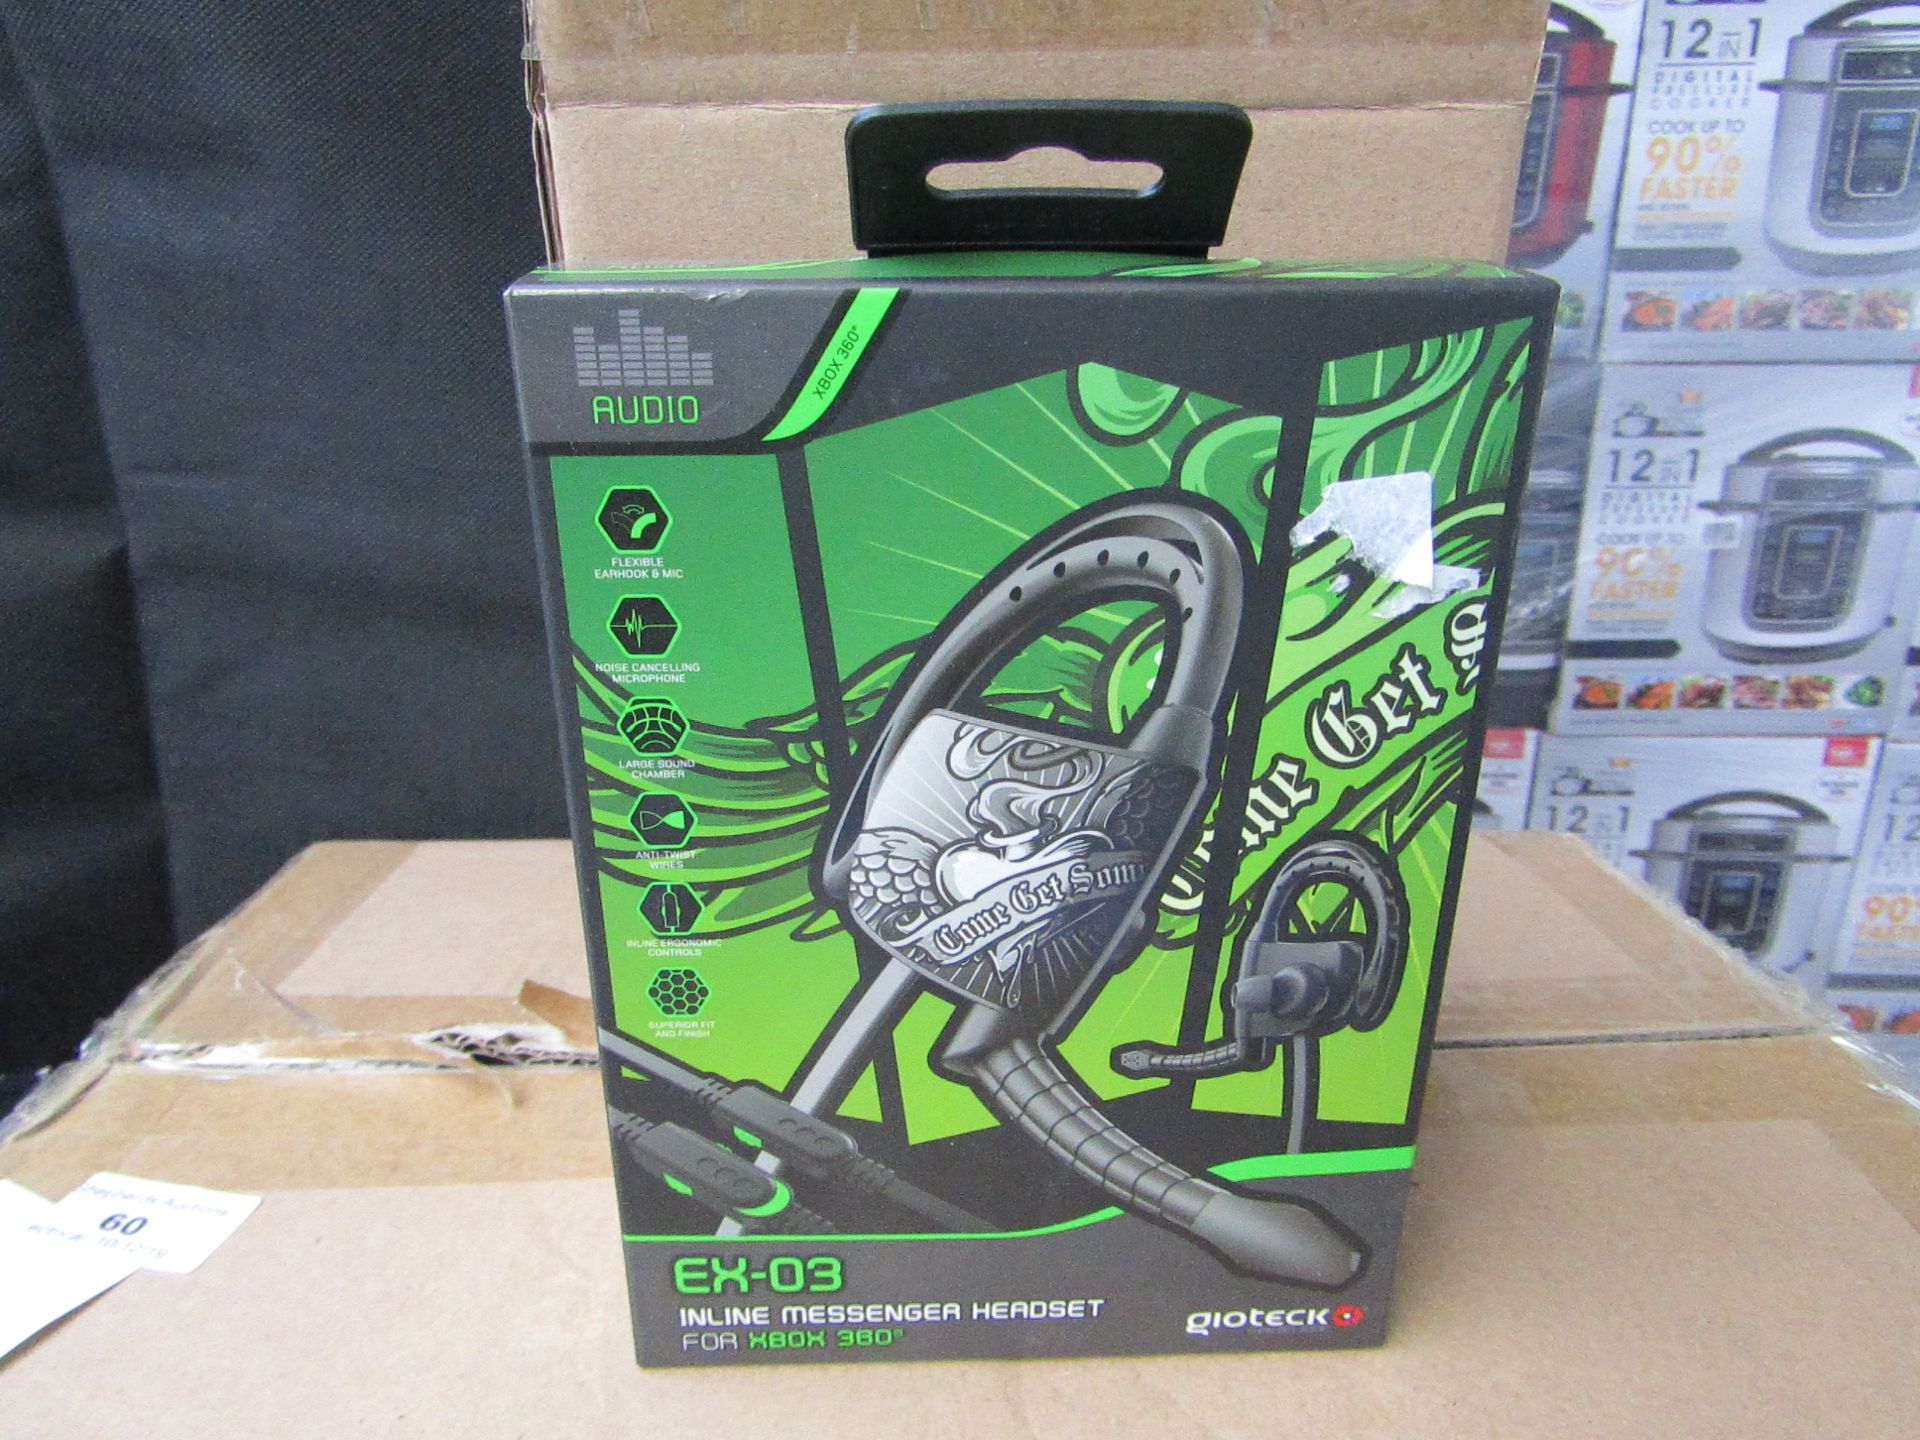 2x Gioteck EX-03 inline messenger headset (XBOX 360), new and boxed.